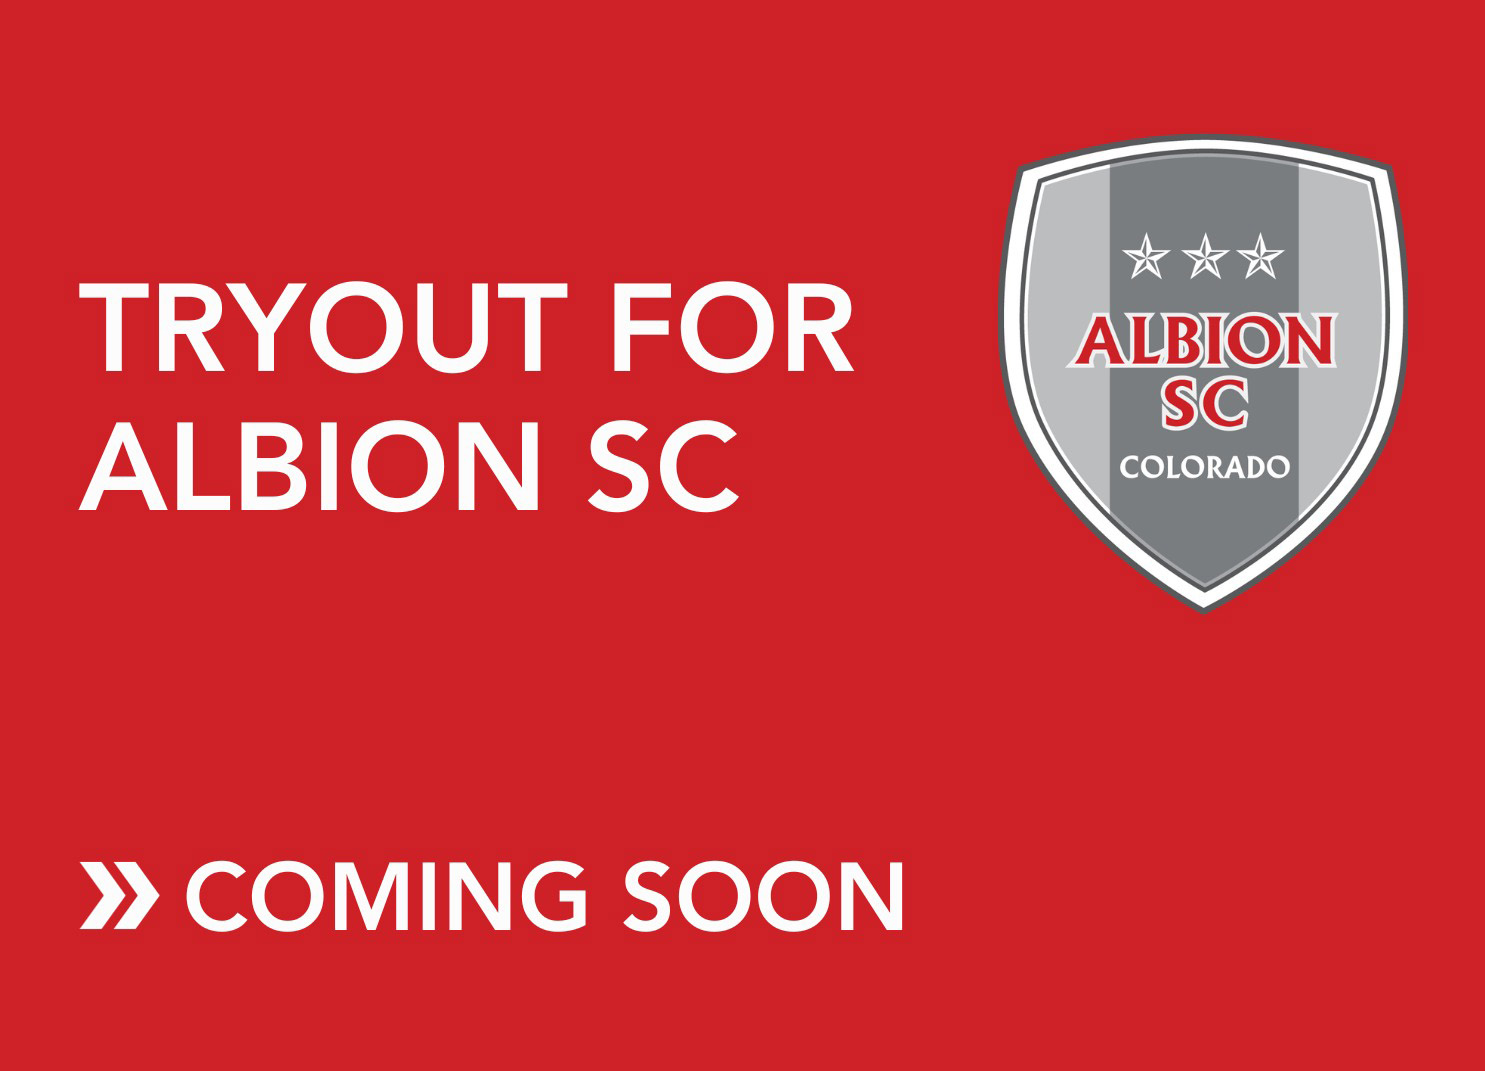 Tryout for Albion SC